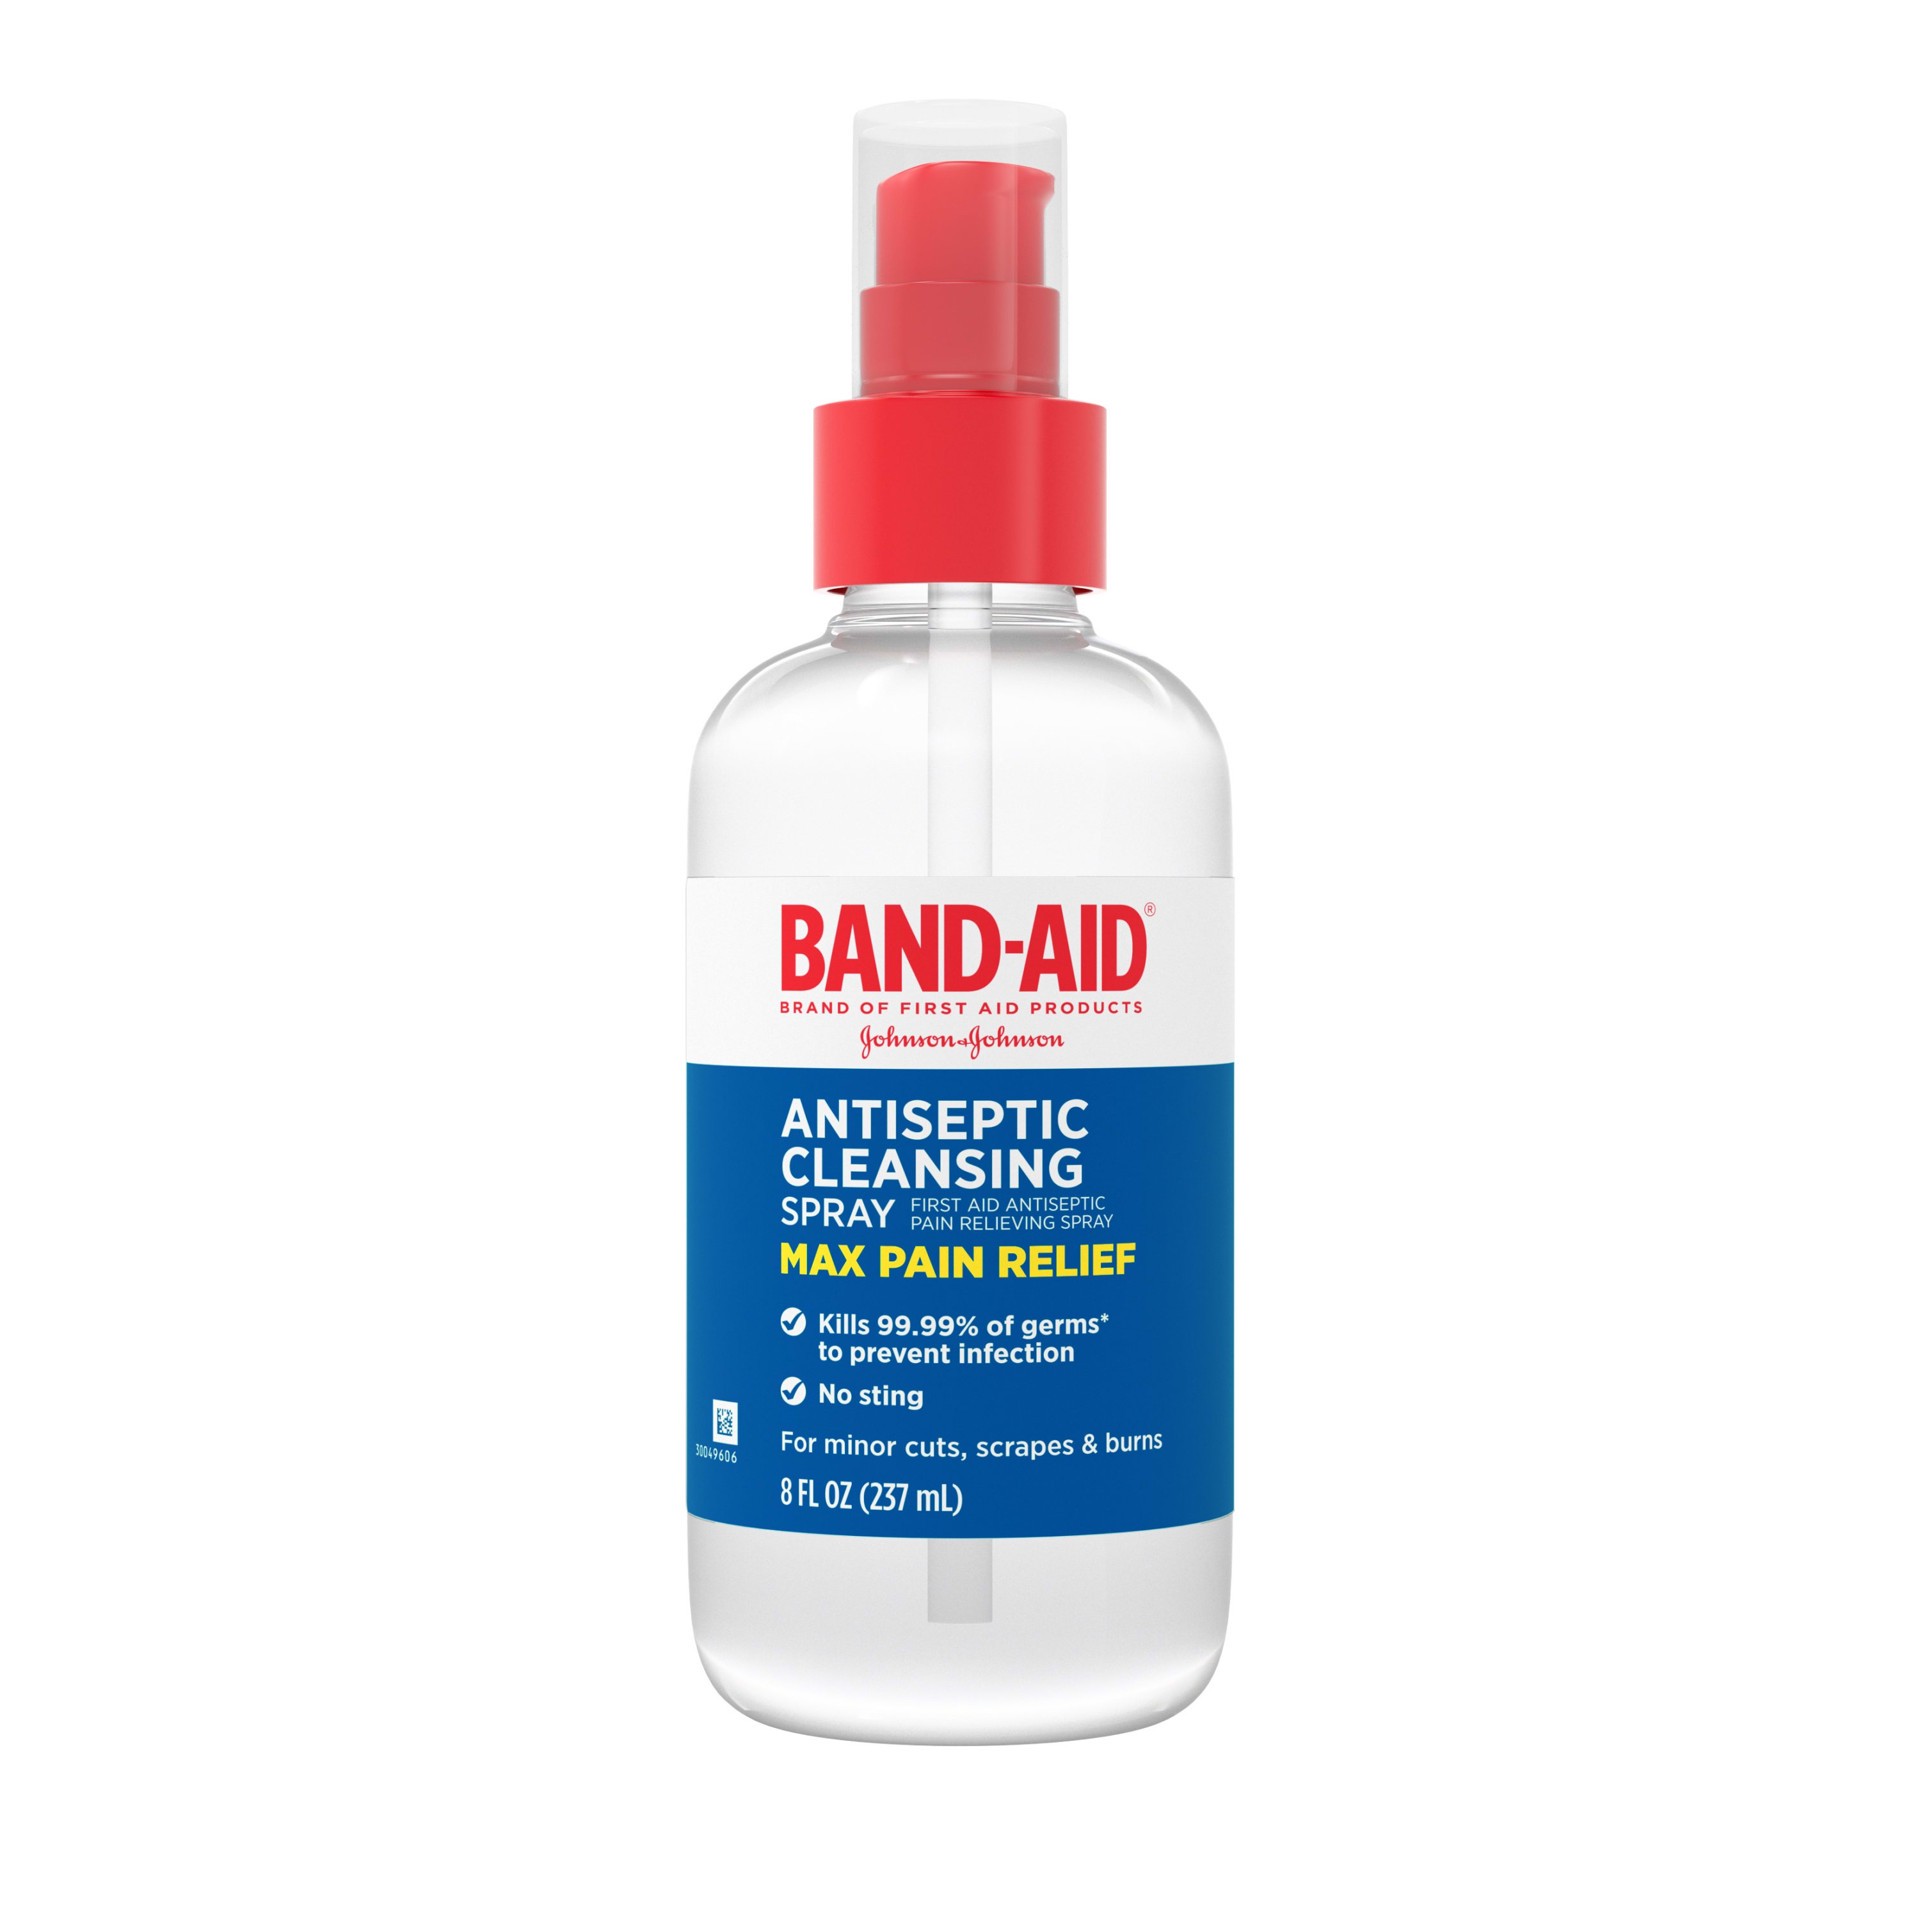 slide 1 of 7, BAND-AID Antiseptic Cleansing Spray, First Aid Antiseptic Spray Relieves Pain & Kill Germs, with Benzalkonium Cl Wound Antiseptic & Pramoxine HCl Topical Analgesic, 8 fl. oz, 8 fl oz